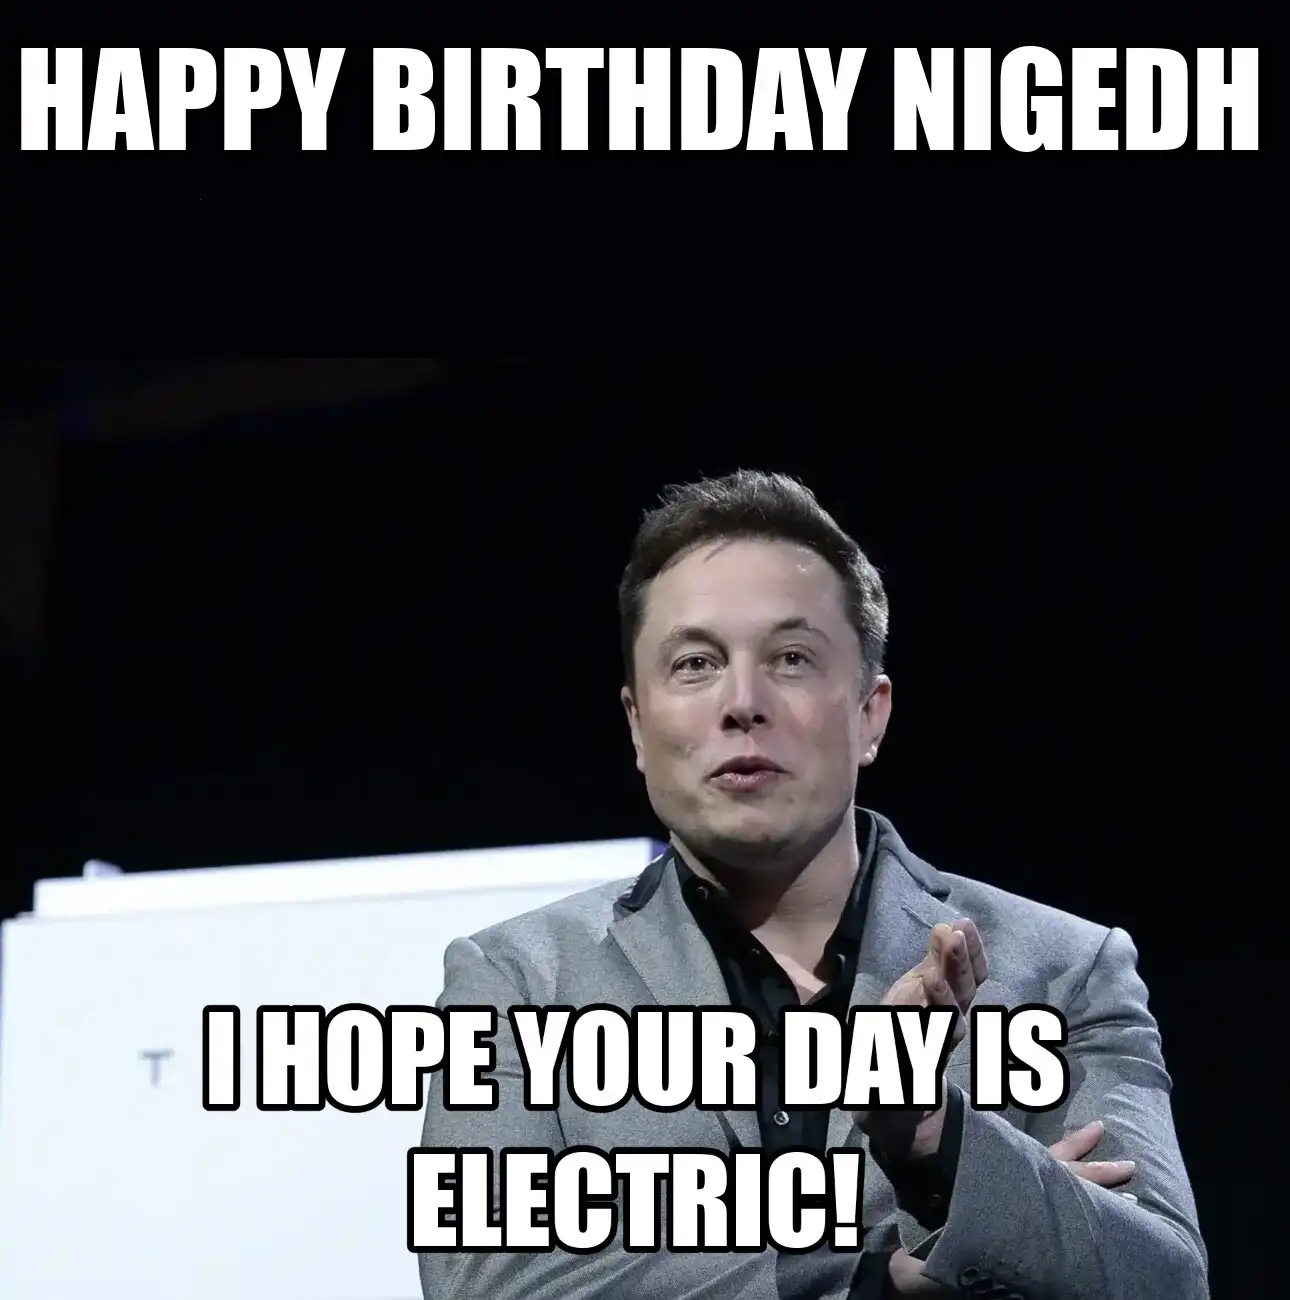 Happy Birthday Nigedh I Hope Your Day Is Electric Meme